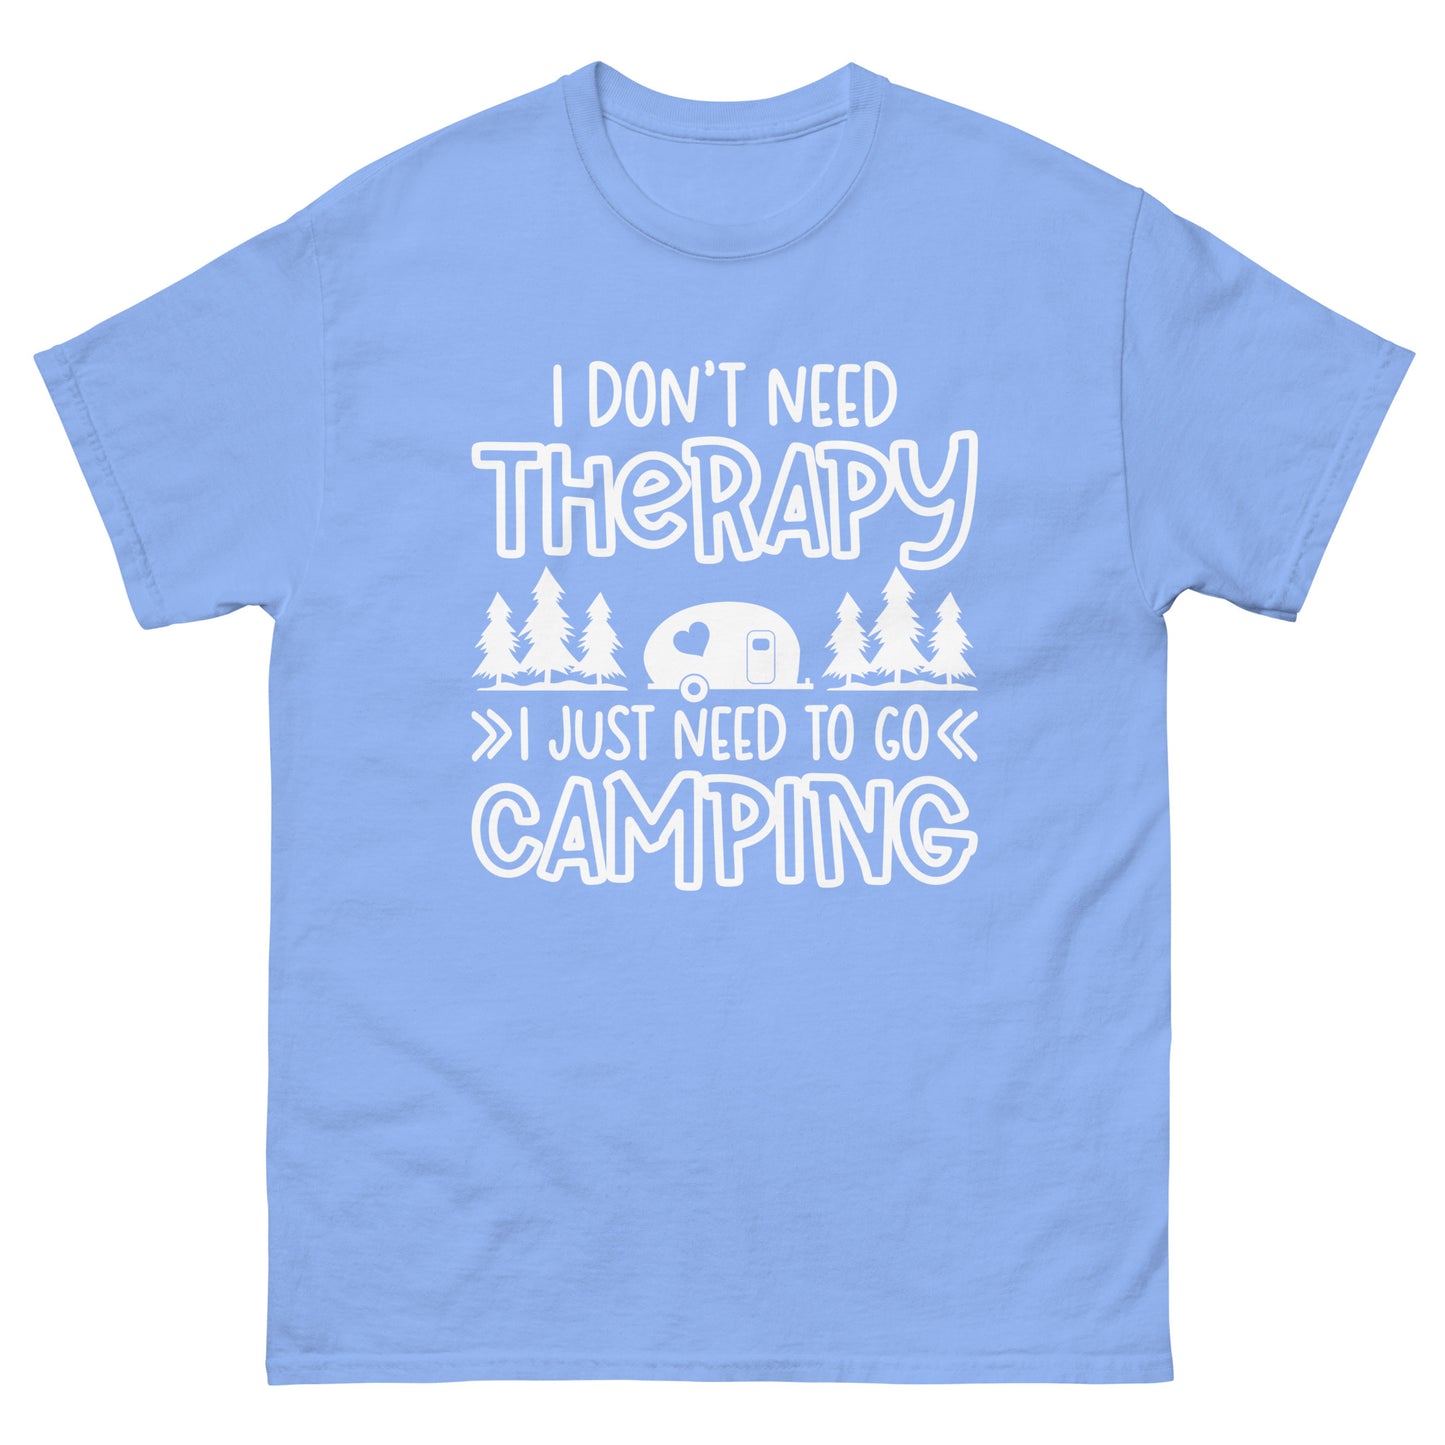 I don't need therapy I just need camping - classic tee